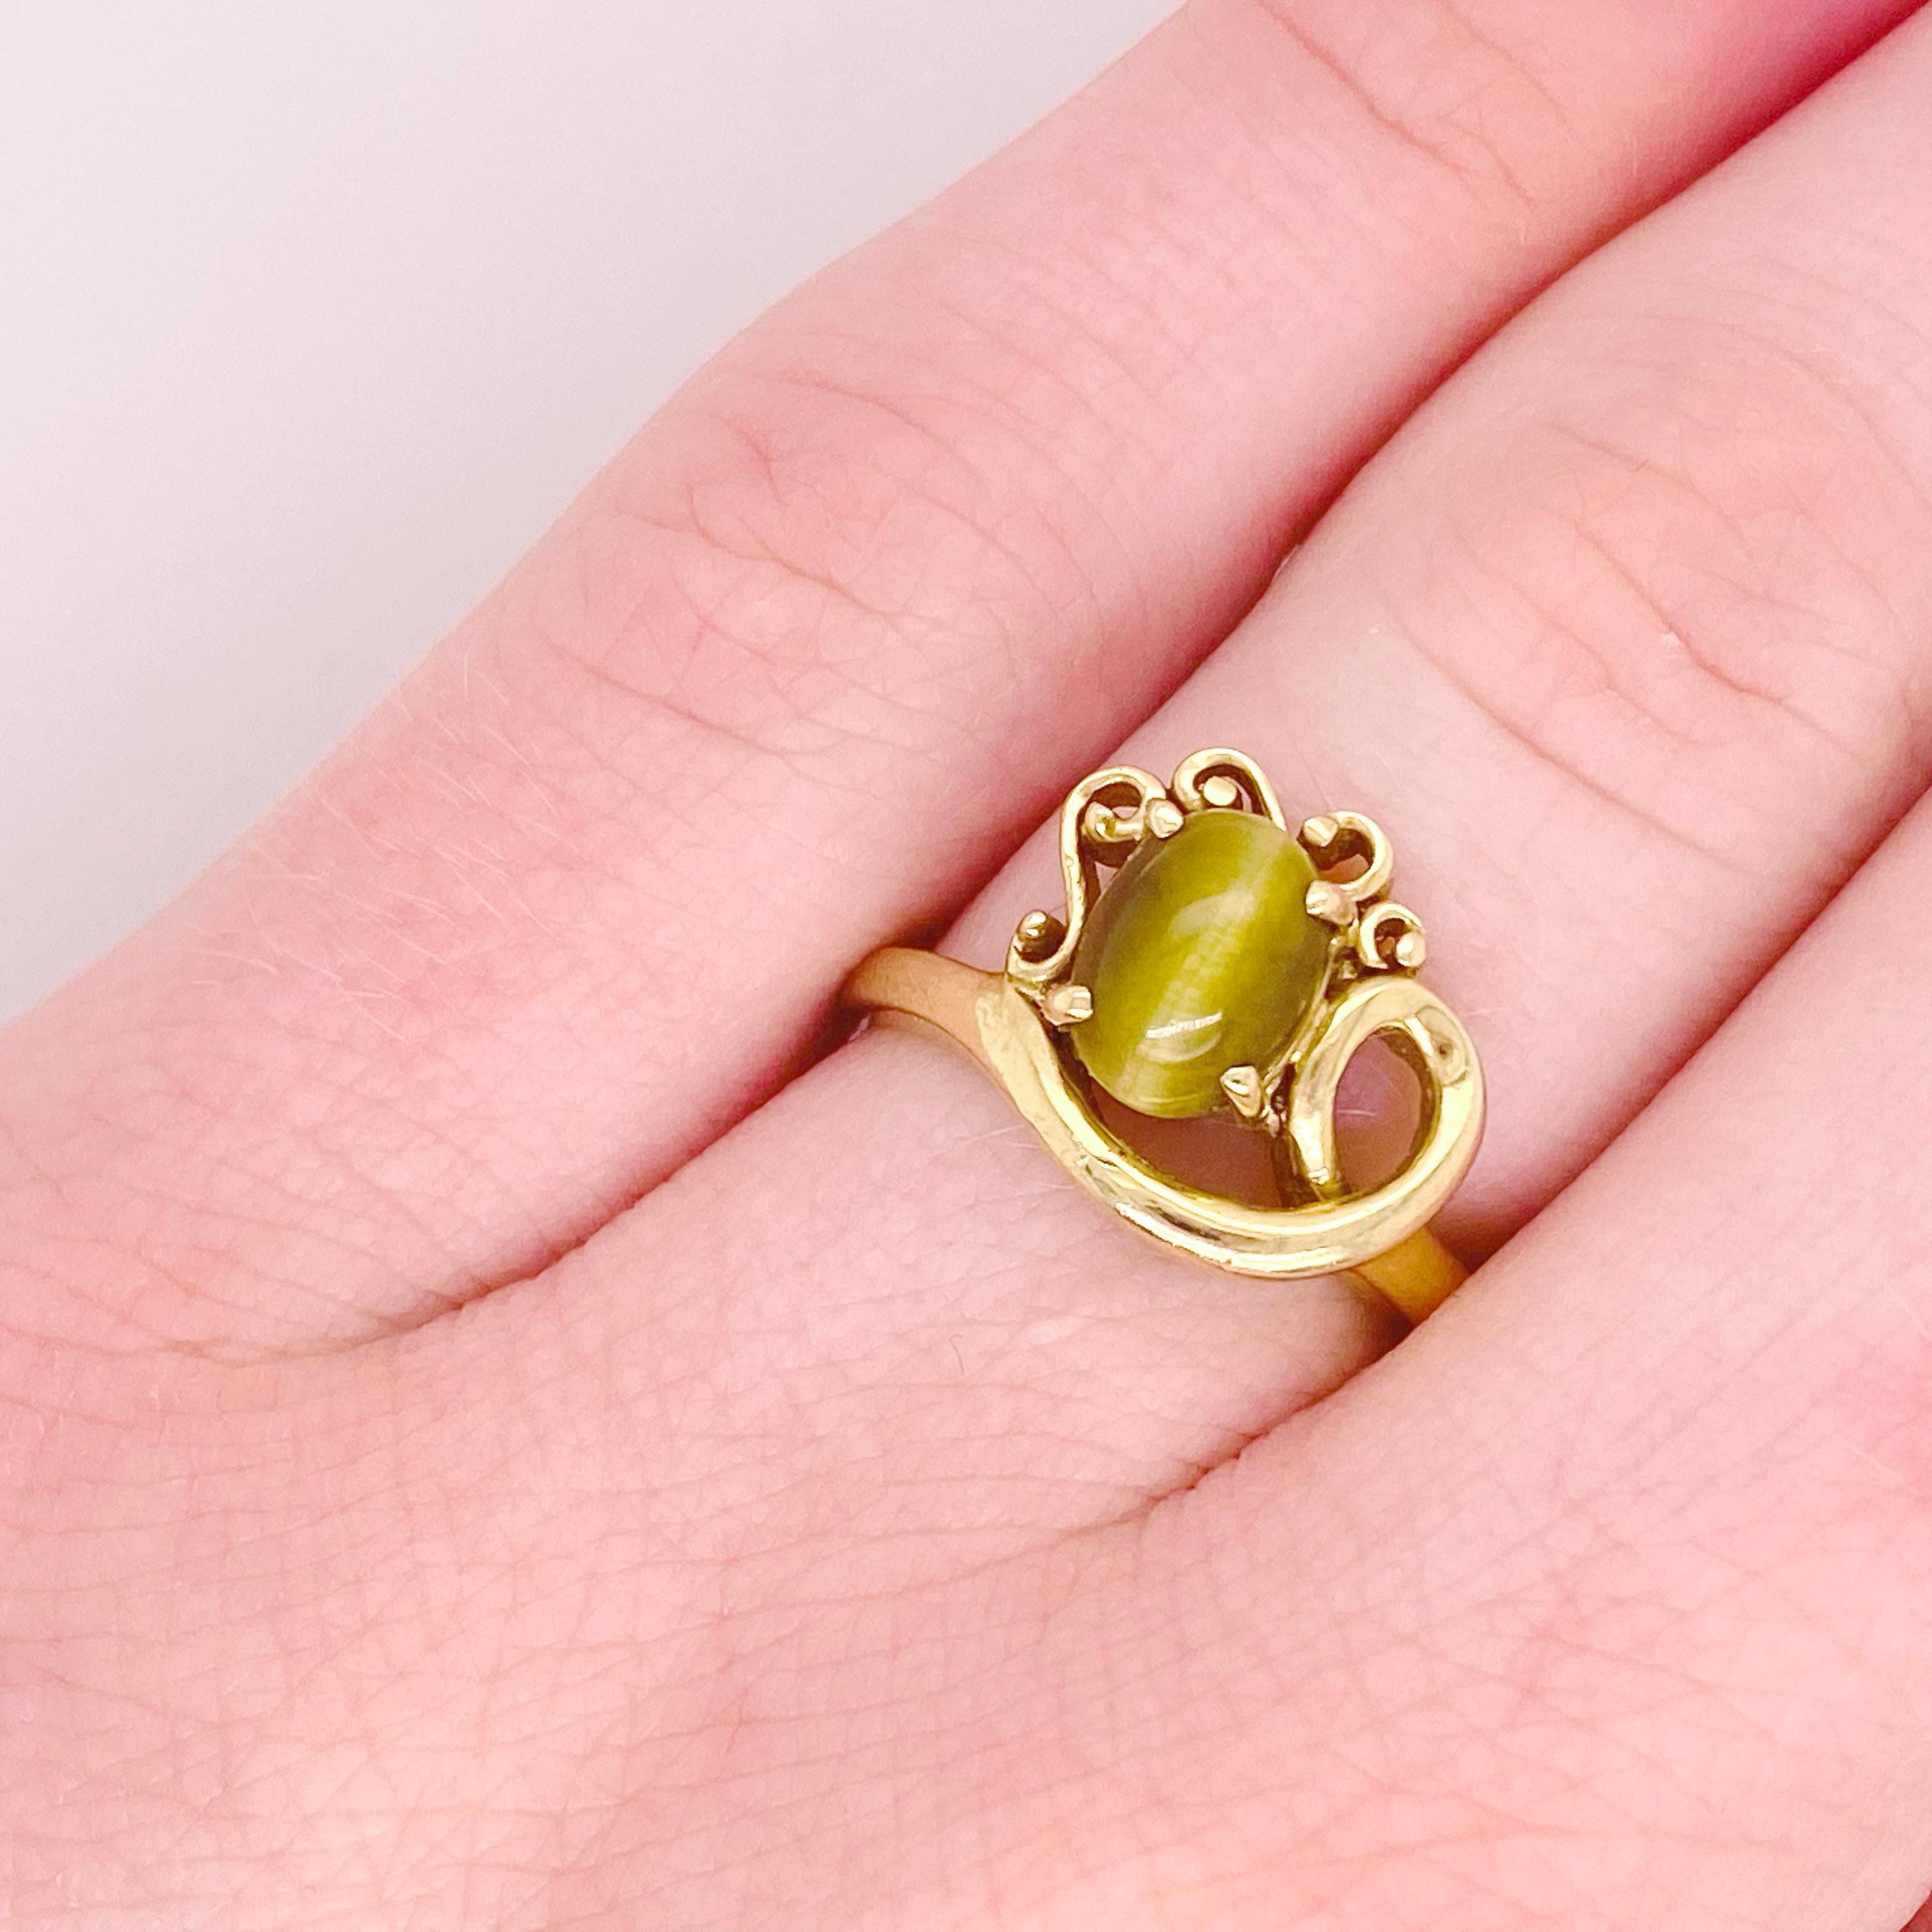 This 14 karat yellow gold ring has a honey colored tiger’s eye gemstone that will wink at you with every roll or your hand! The asymmetrical design is so popular and trending with all the designers. Buy this estate ring for 1/4th of what it would